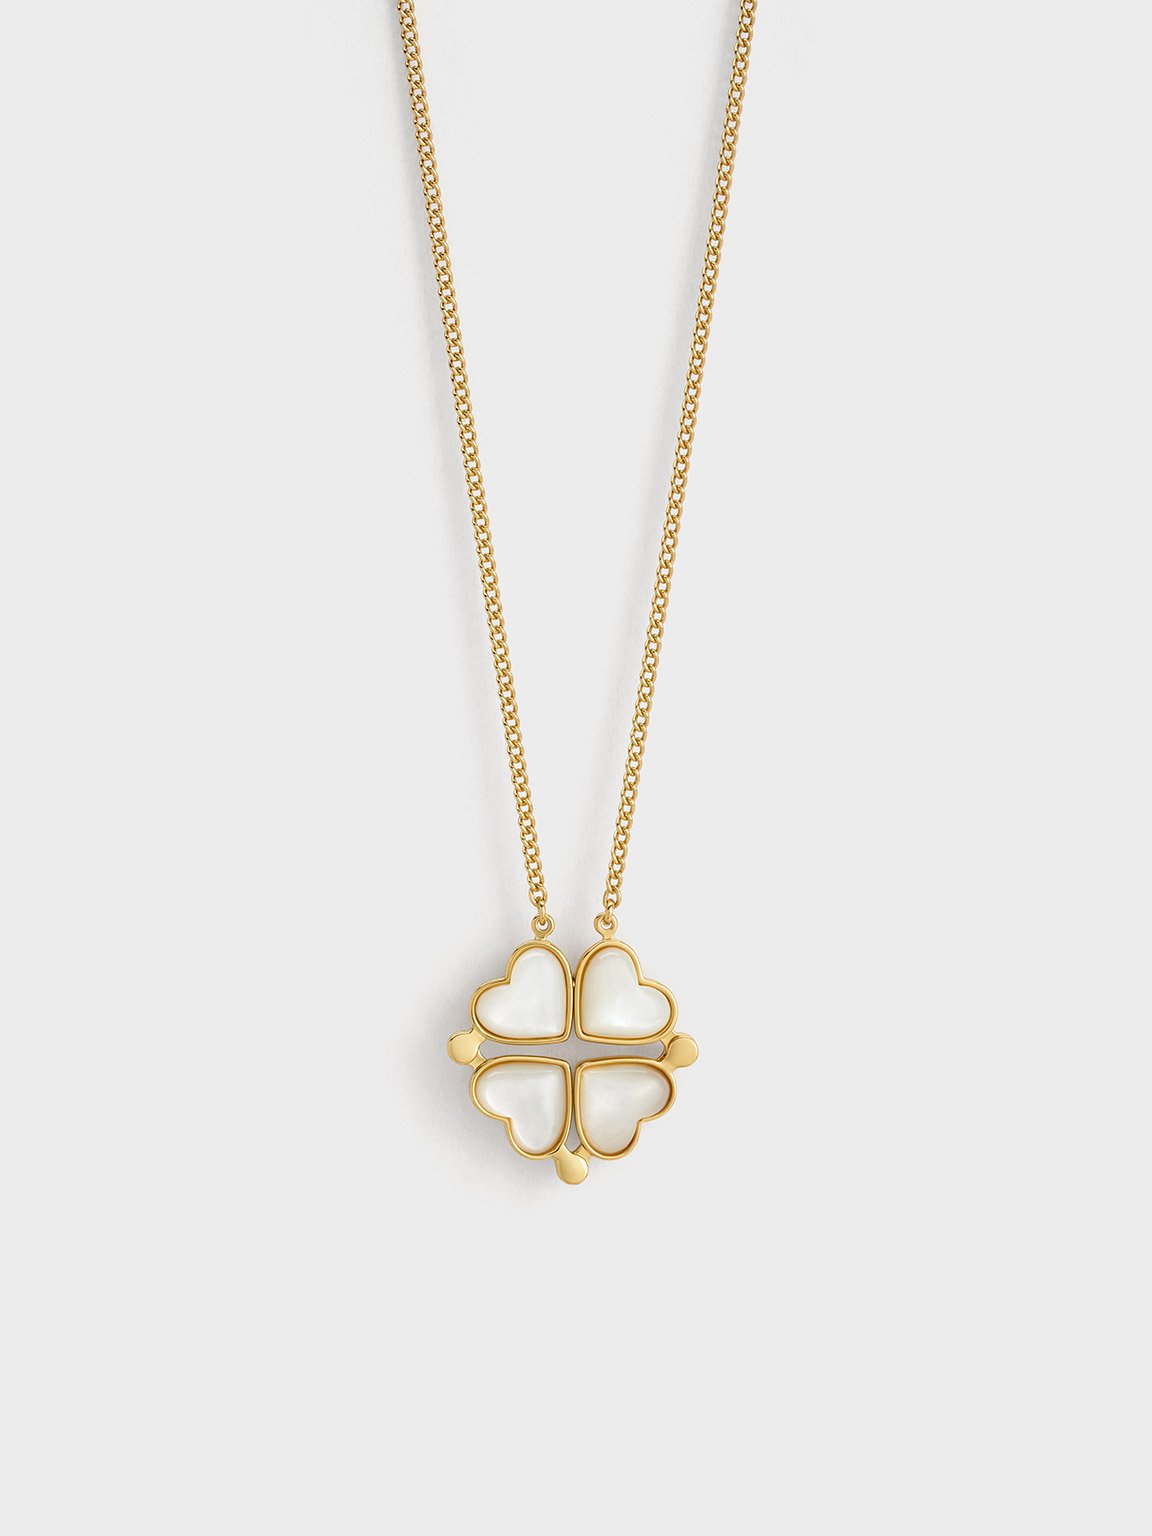 Gold Clover Necklace Mothers Day -  Australia